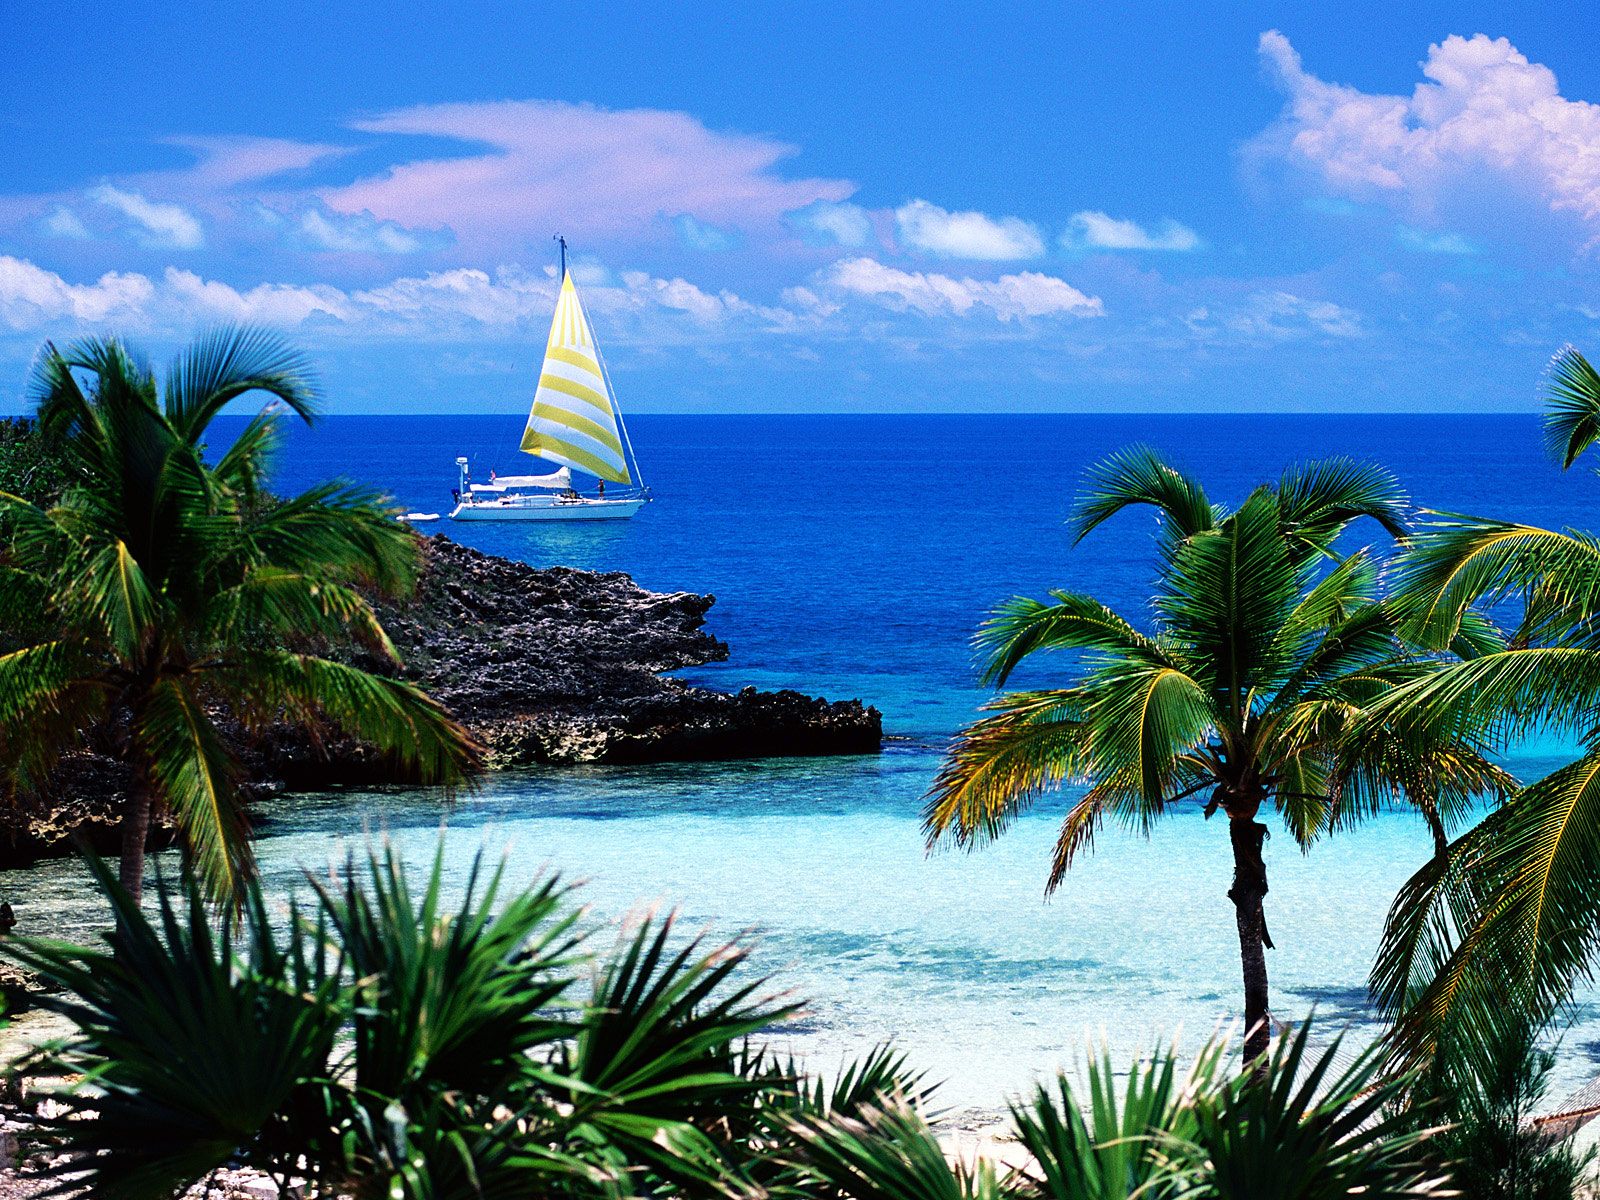 Point Harbour Island Bahamas Wallpaper in high resolution for free